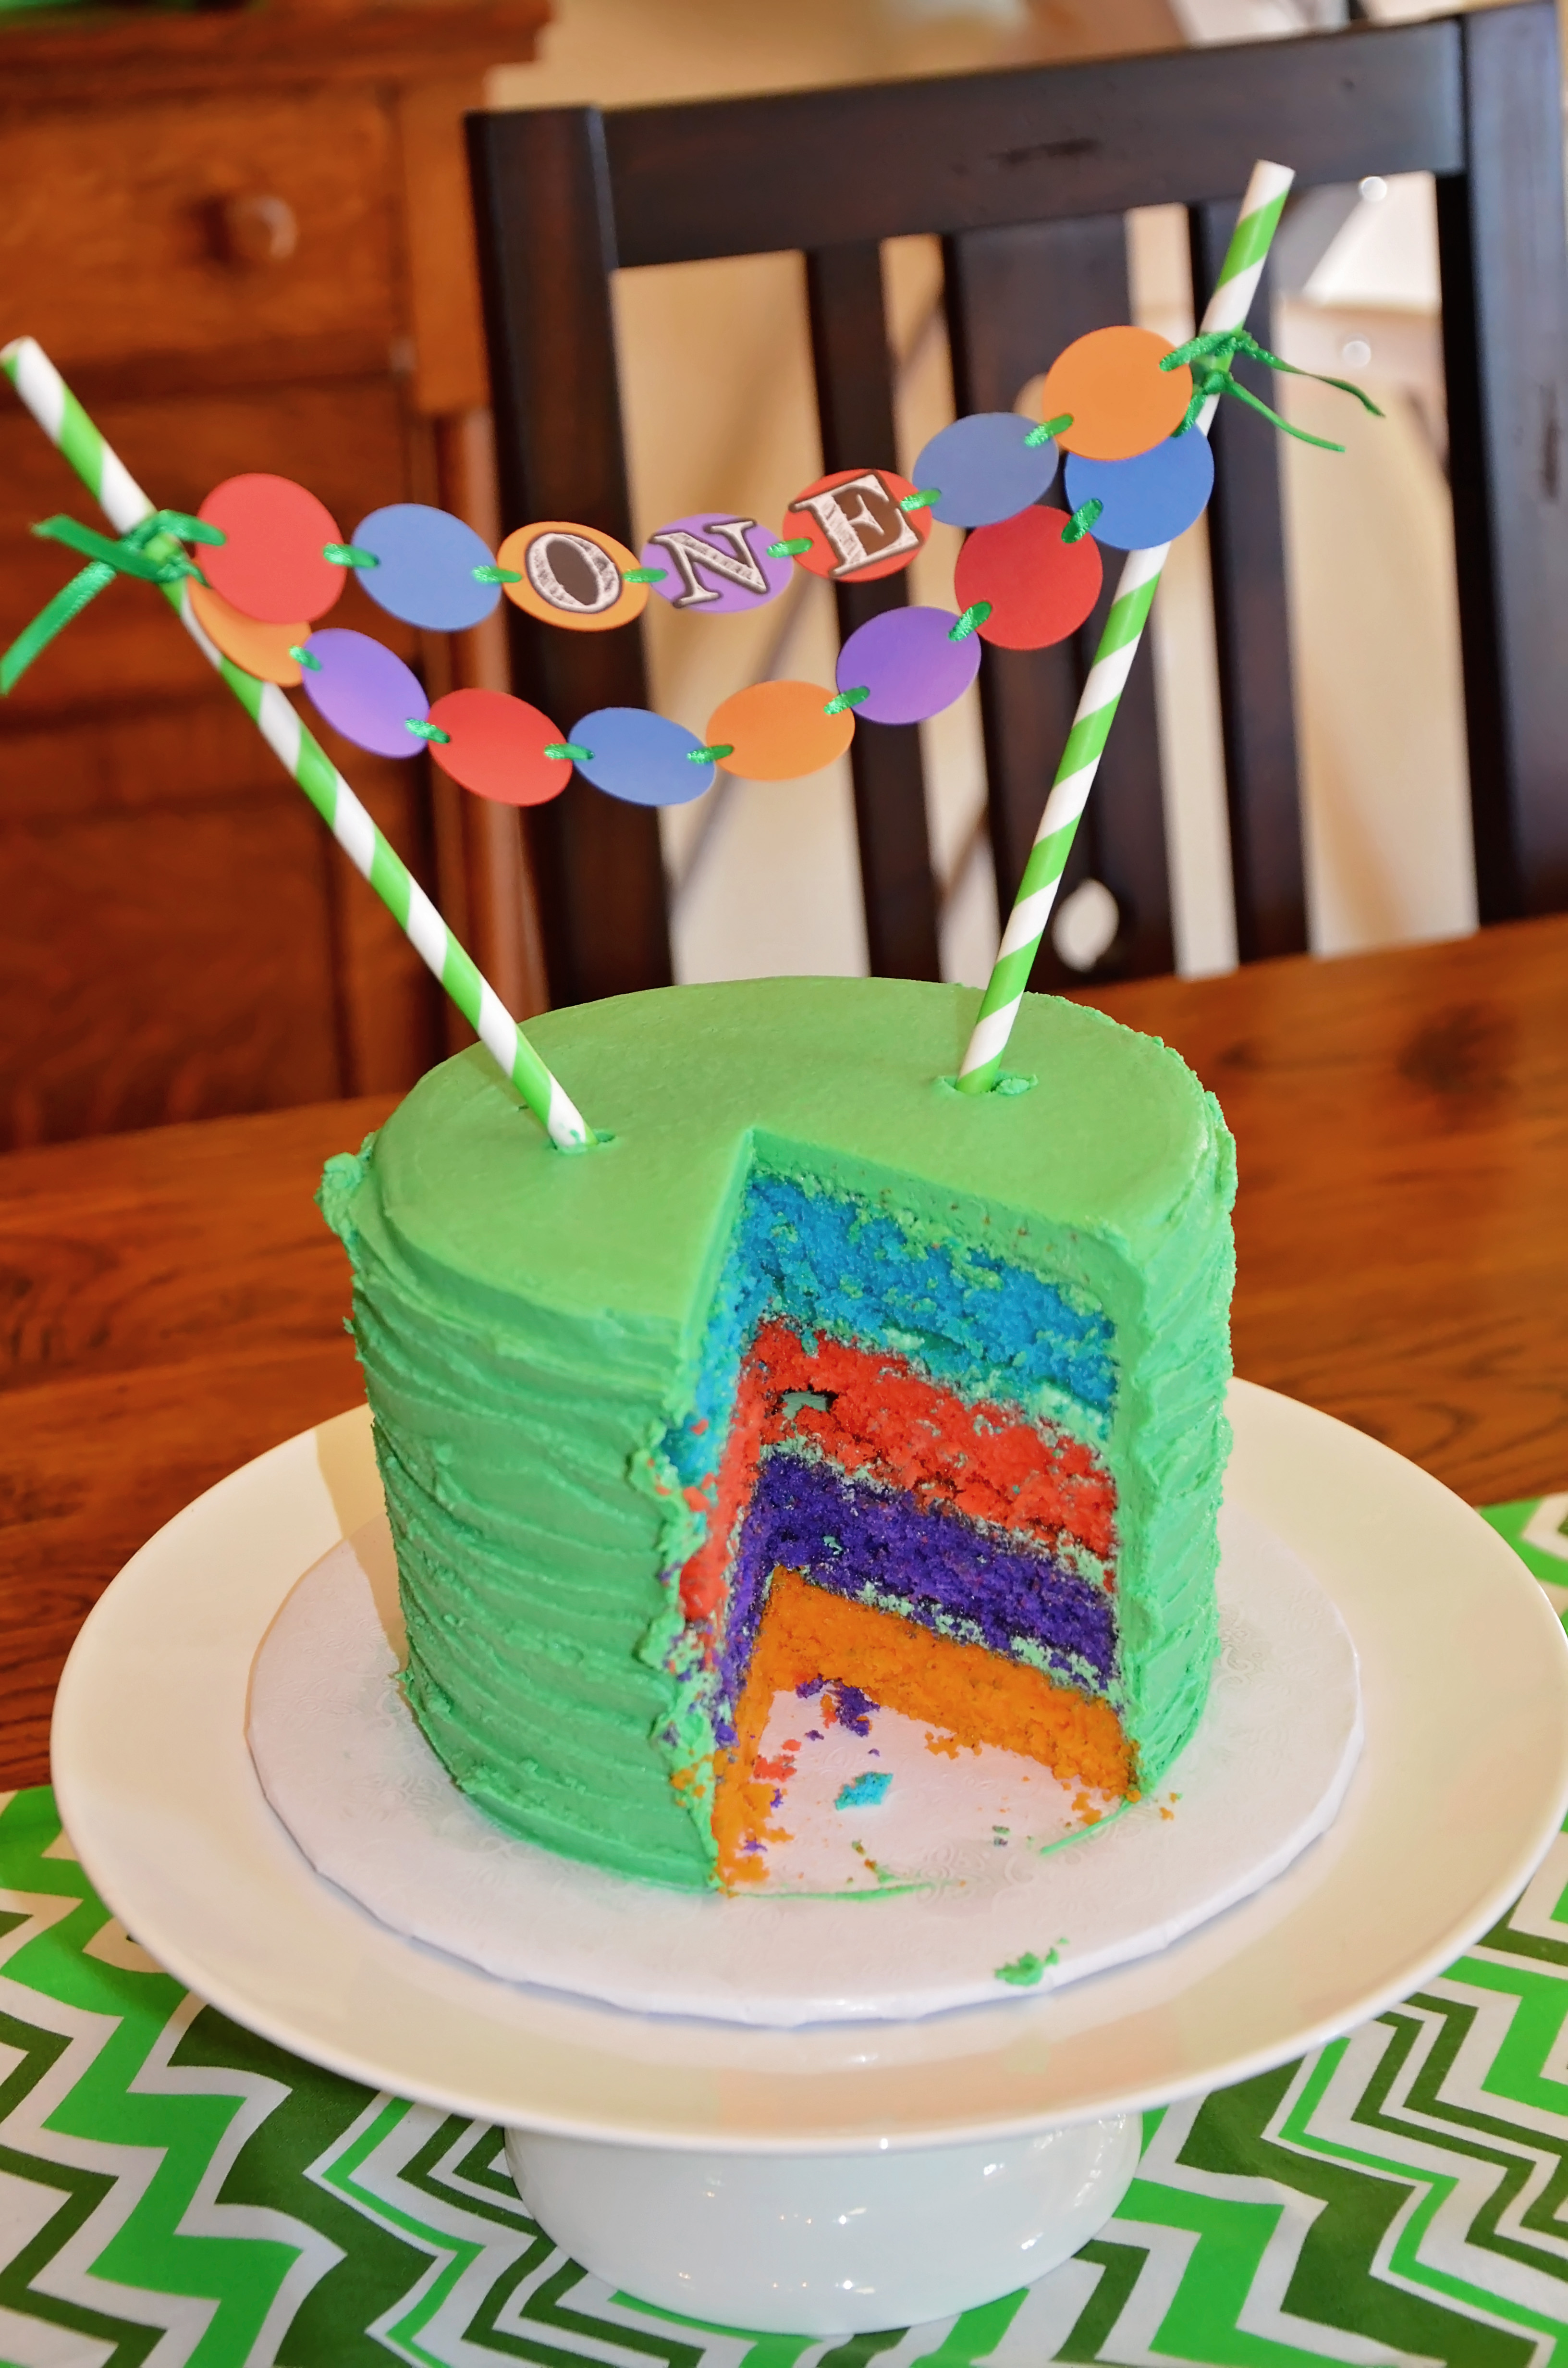 One Creative Housewife: Teenage Mutant Ninja Turtle Party {Part 1 The  Decorations}